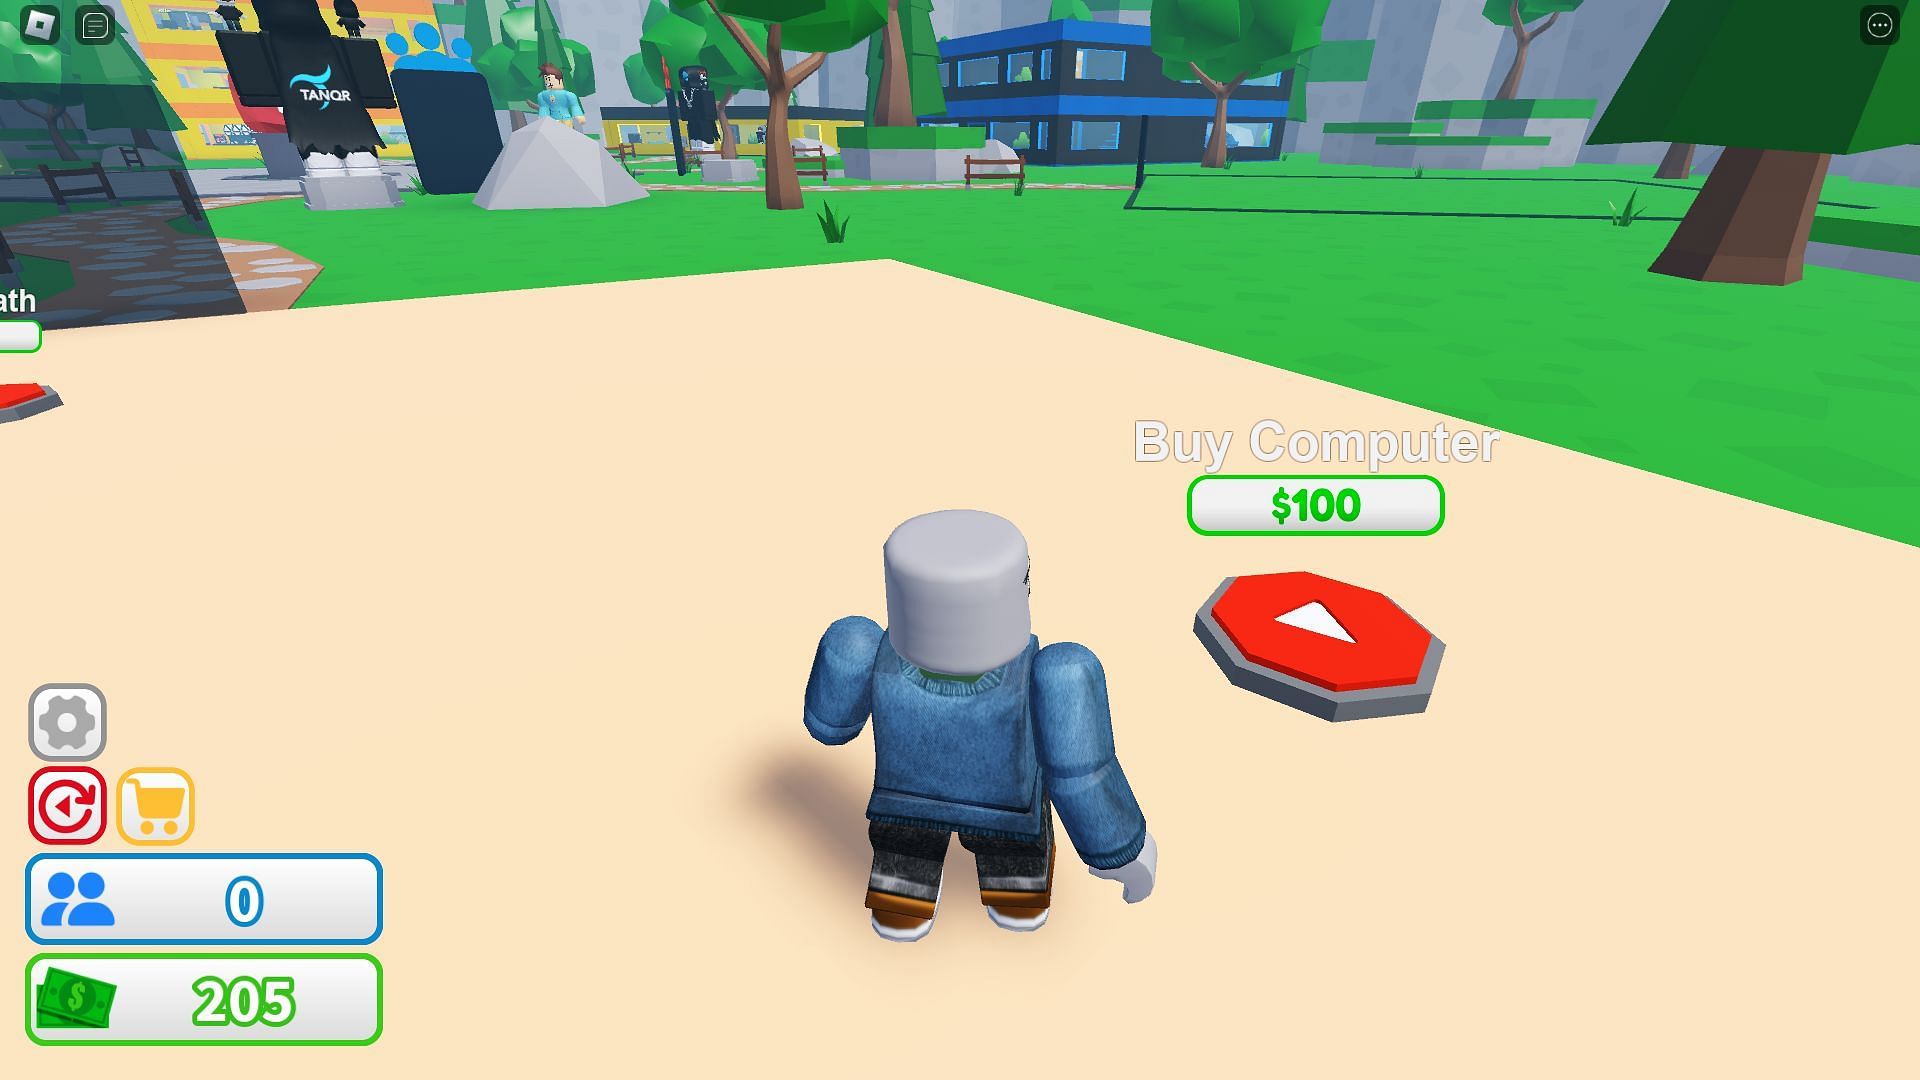 Purchasing a computer to become a YouTuber (Image via Roblox)